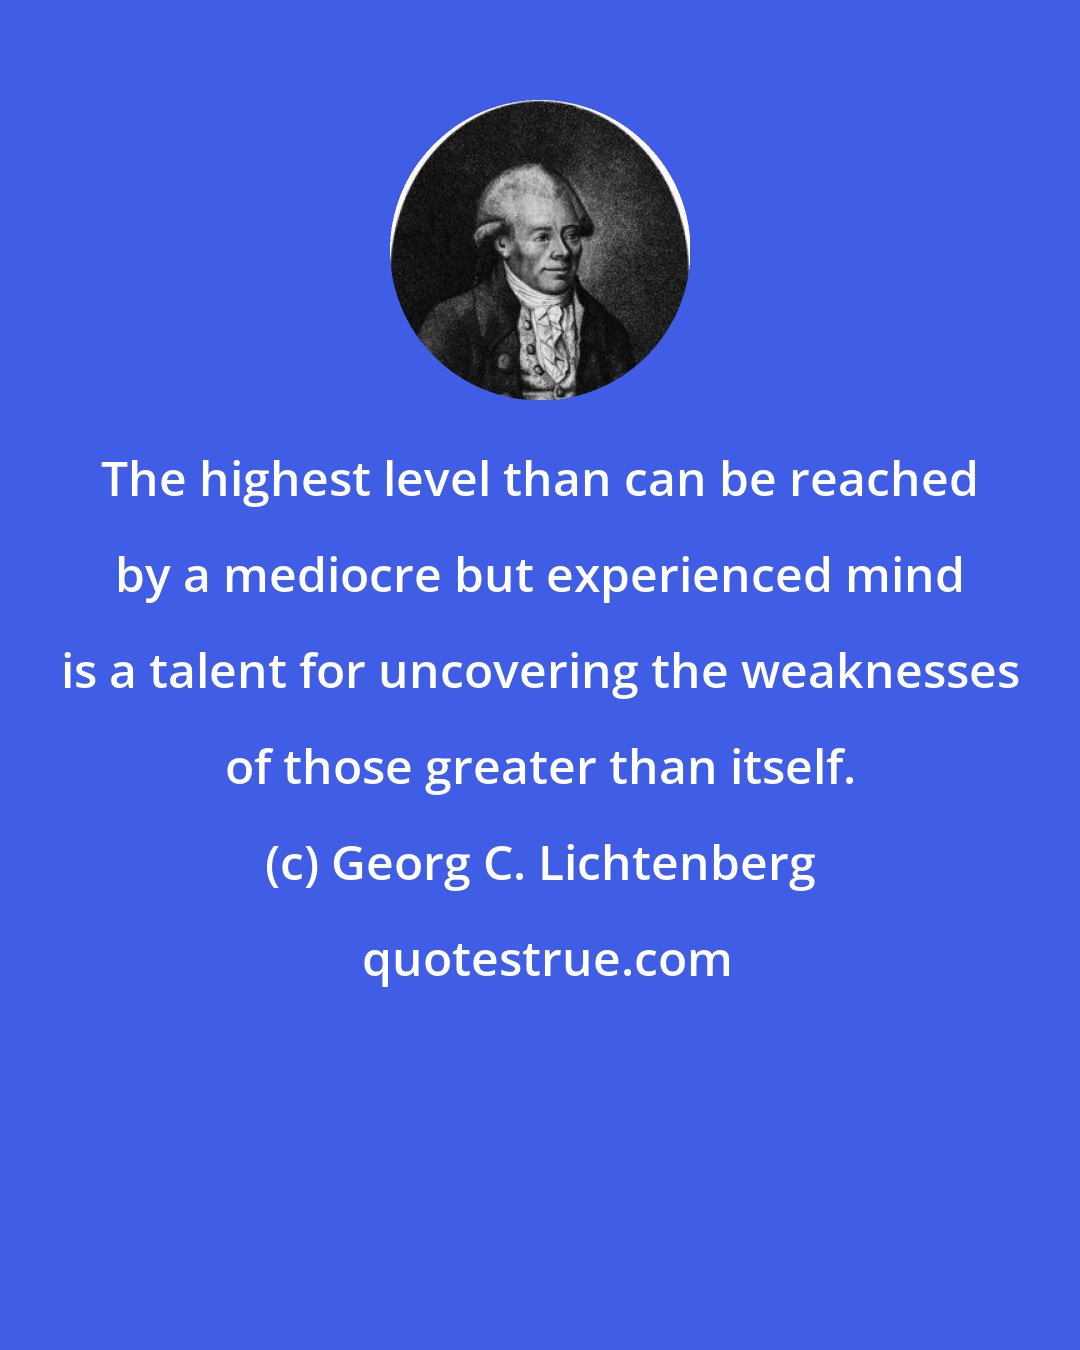 Georg C. Lichtenberg: The highest level than can be reached by a mediocre but experienced mind is a talent for uncovering the weaknesses of those greater than itself.